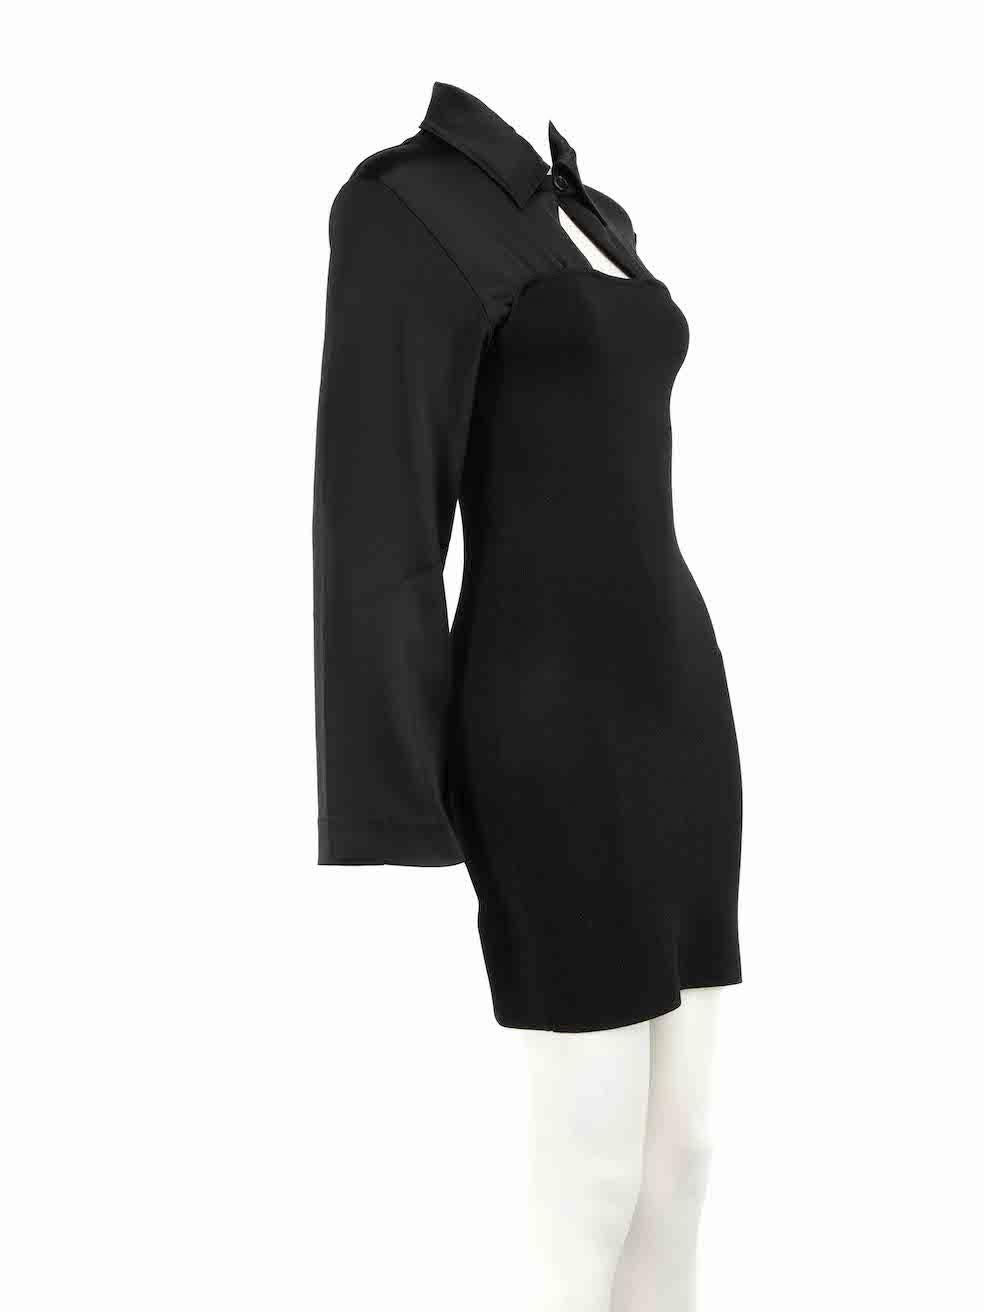 CONDITION is Never worn. No visible wear to dress is evident on this new NANUSHKA designer resale item.
 
 Details
 Black
 Synthetic
 Bodycon dress
 Mini
 Long sleeves
 Buttoned cuffs
 Button fastening
 
 
 Made in Hungary
 
 Composition
 78%